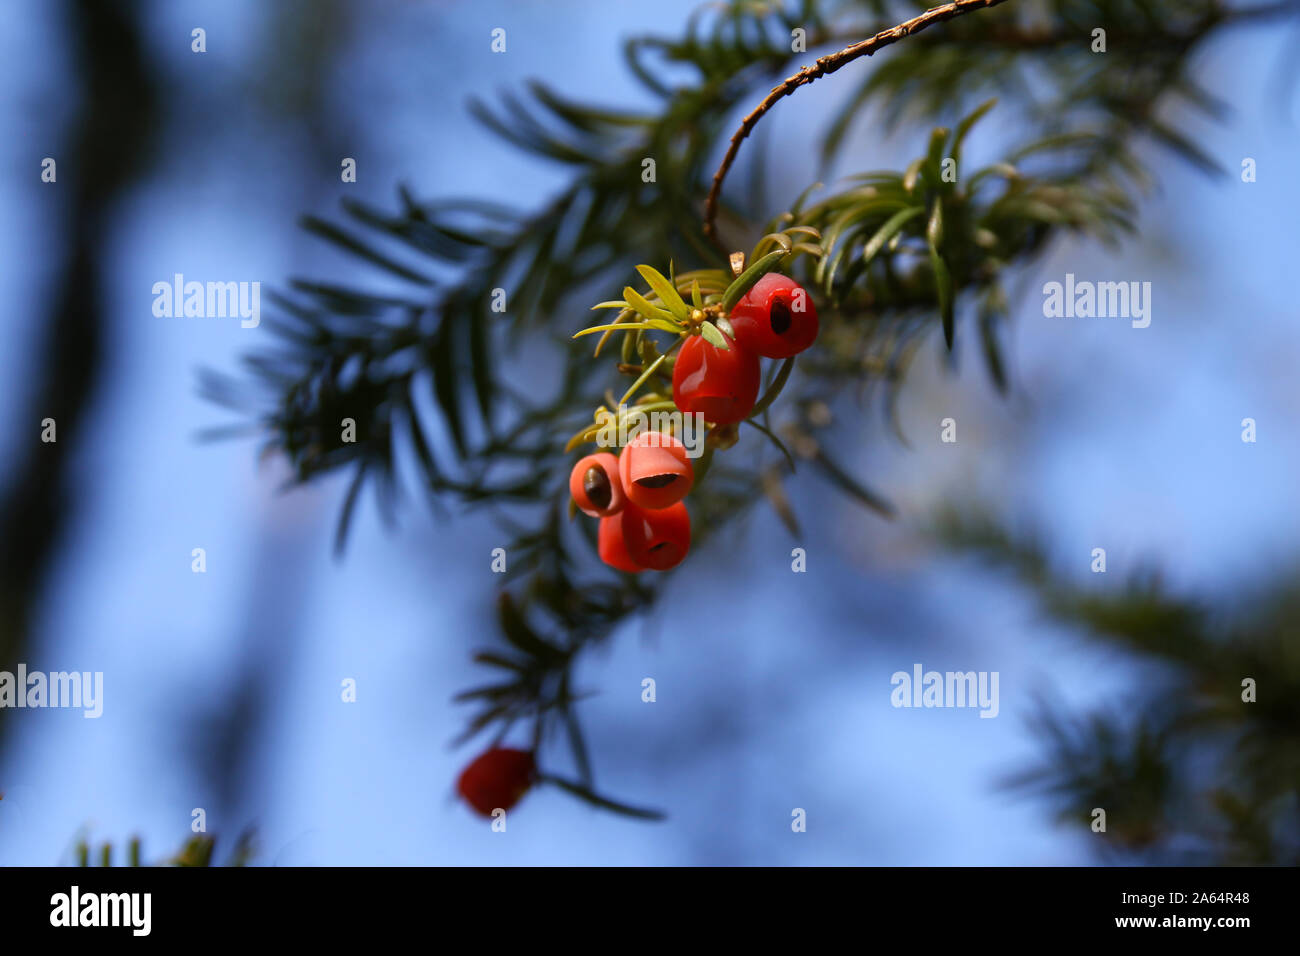 Twig of a yew with red berries Stock Photo